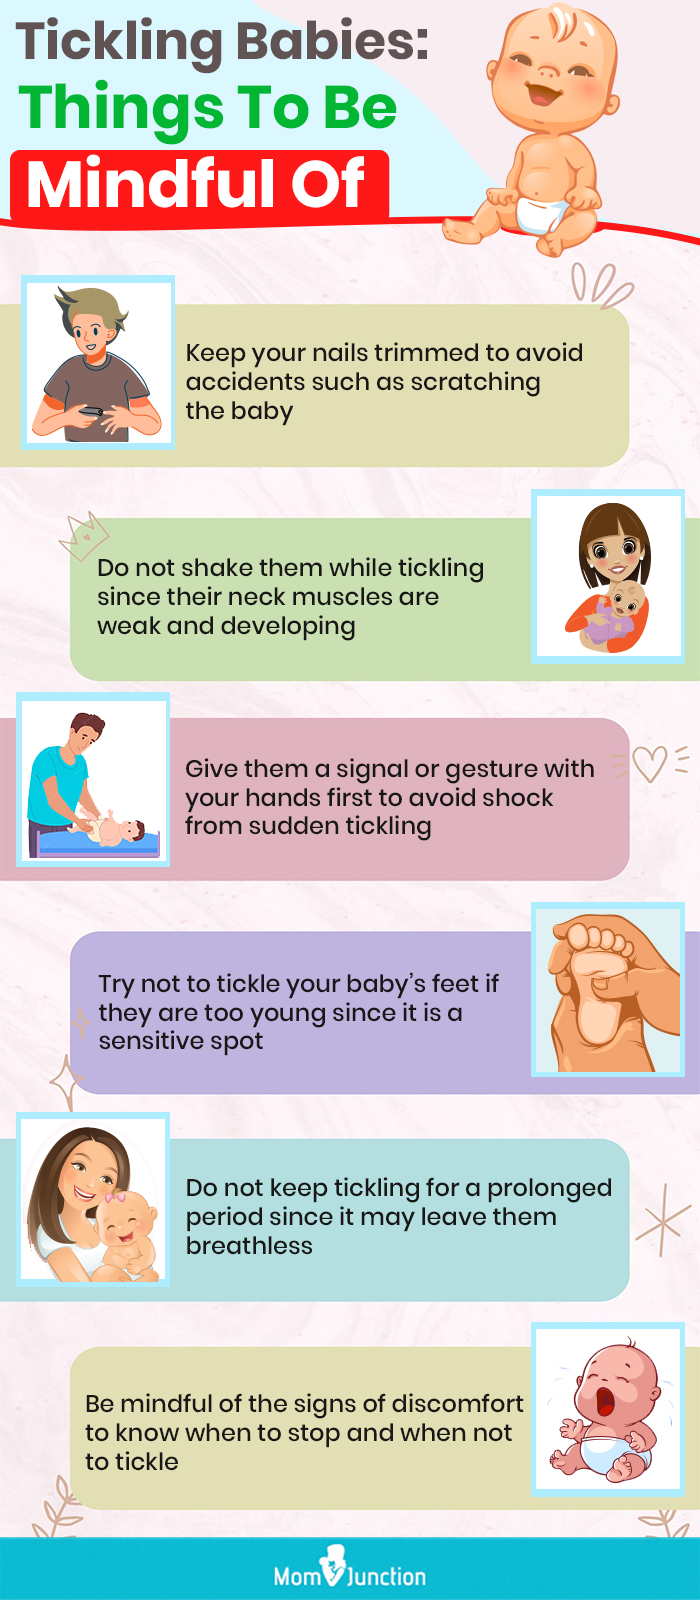 precautions to take while tickling a baby [infographic]